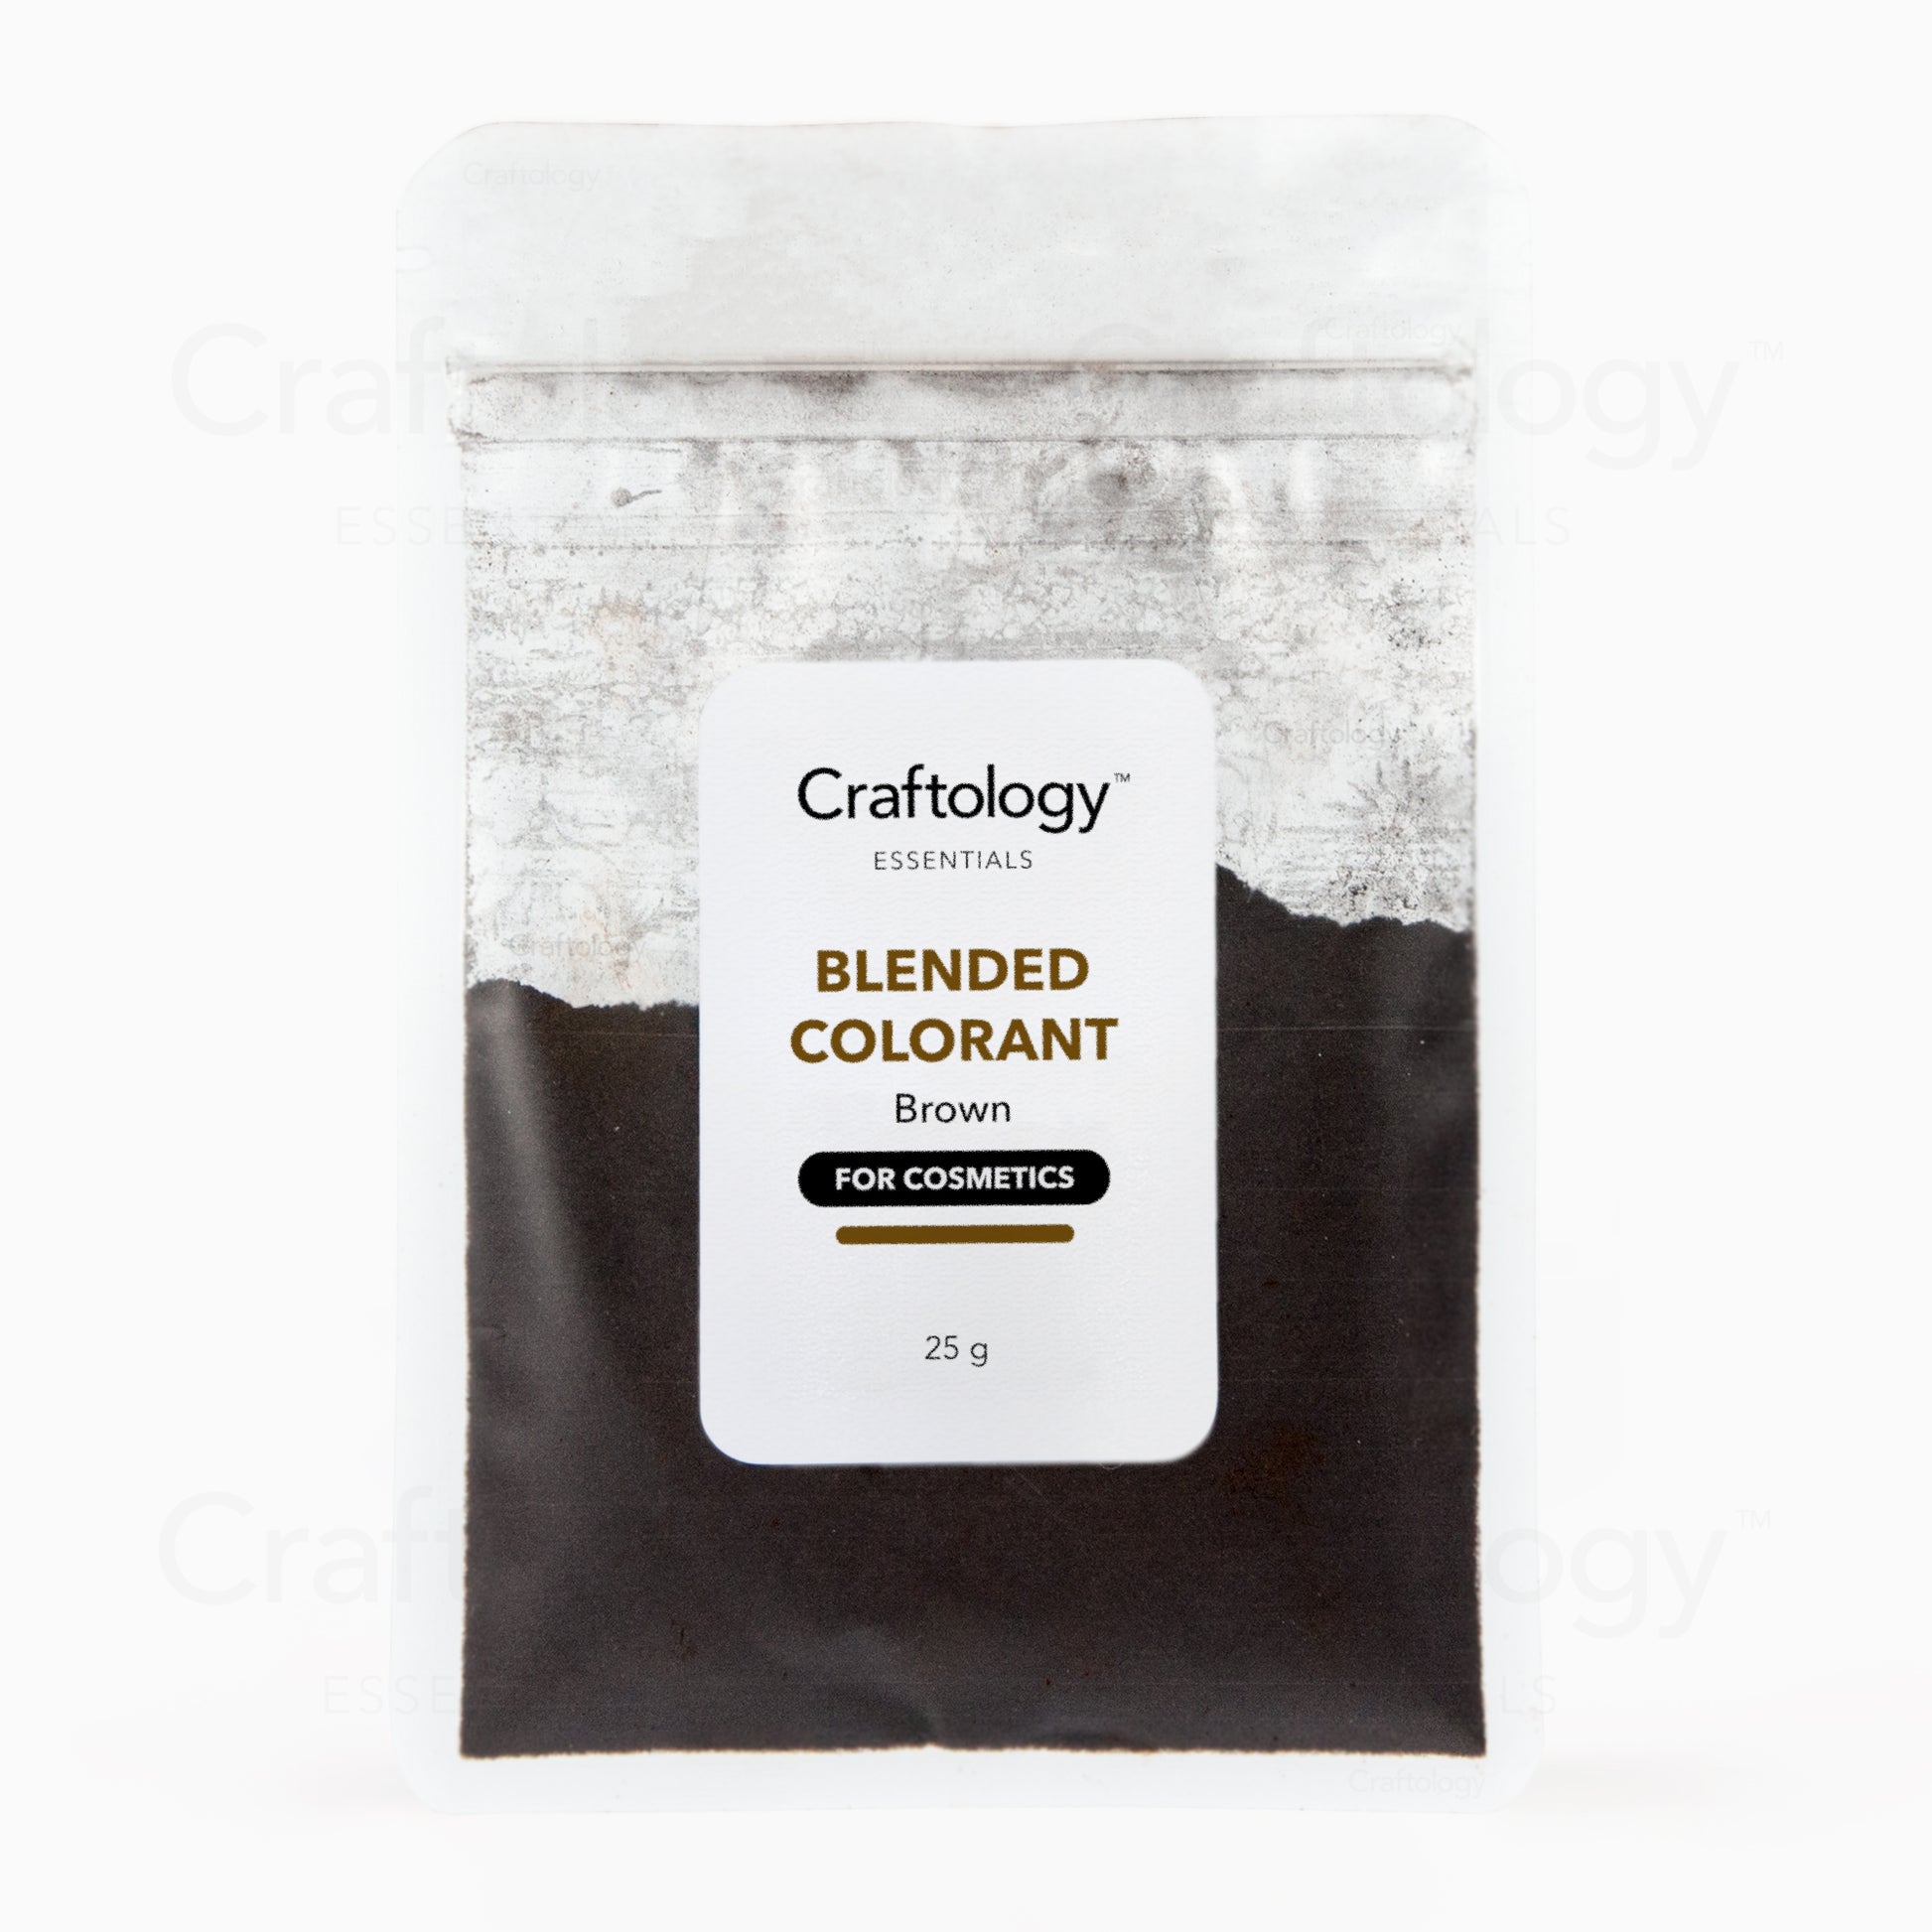 Blended Colorant - Chocolate Brown - Craftology Essentials - Philippines